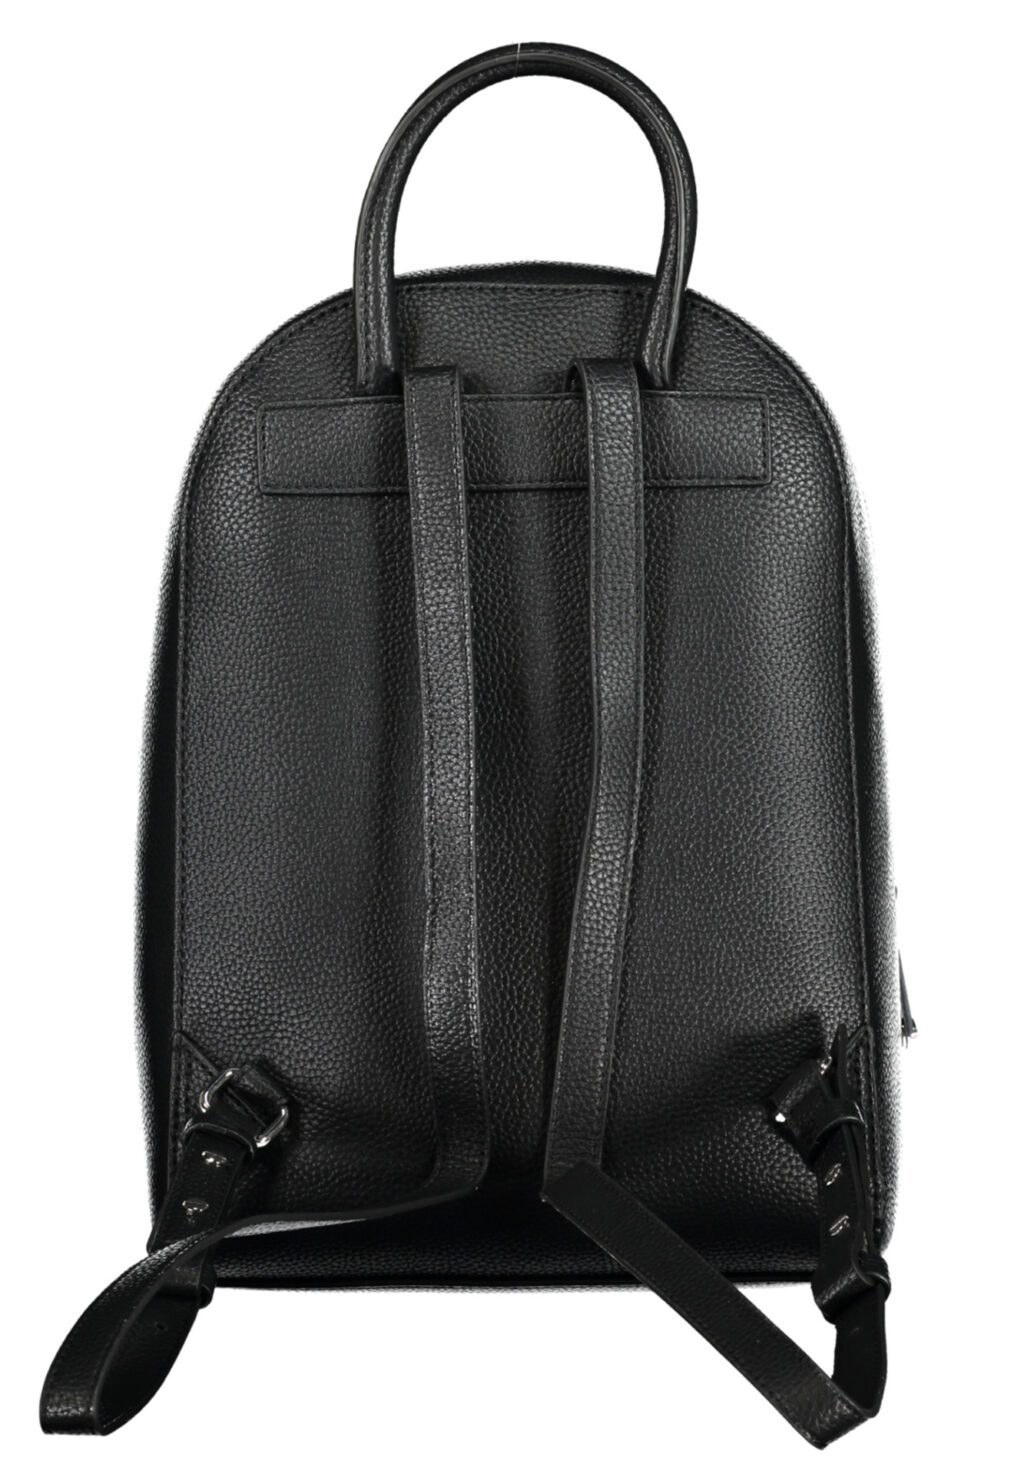 TOMMY HILFIGER WOMEN'S BLACK BACKPACK AW0AW15213_NEBDS